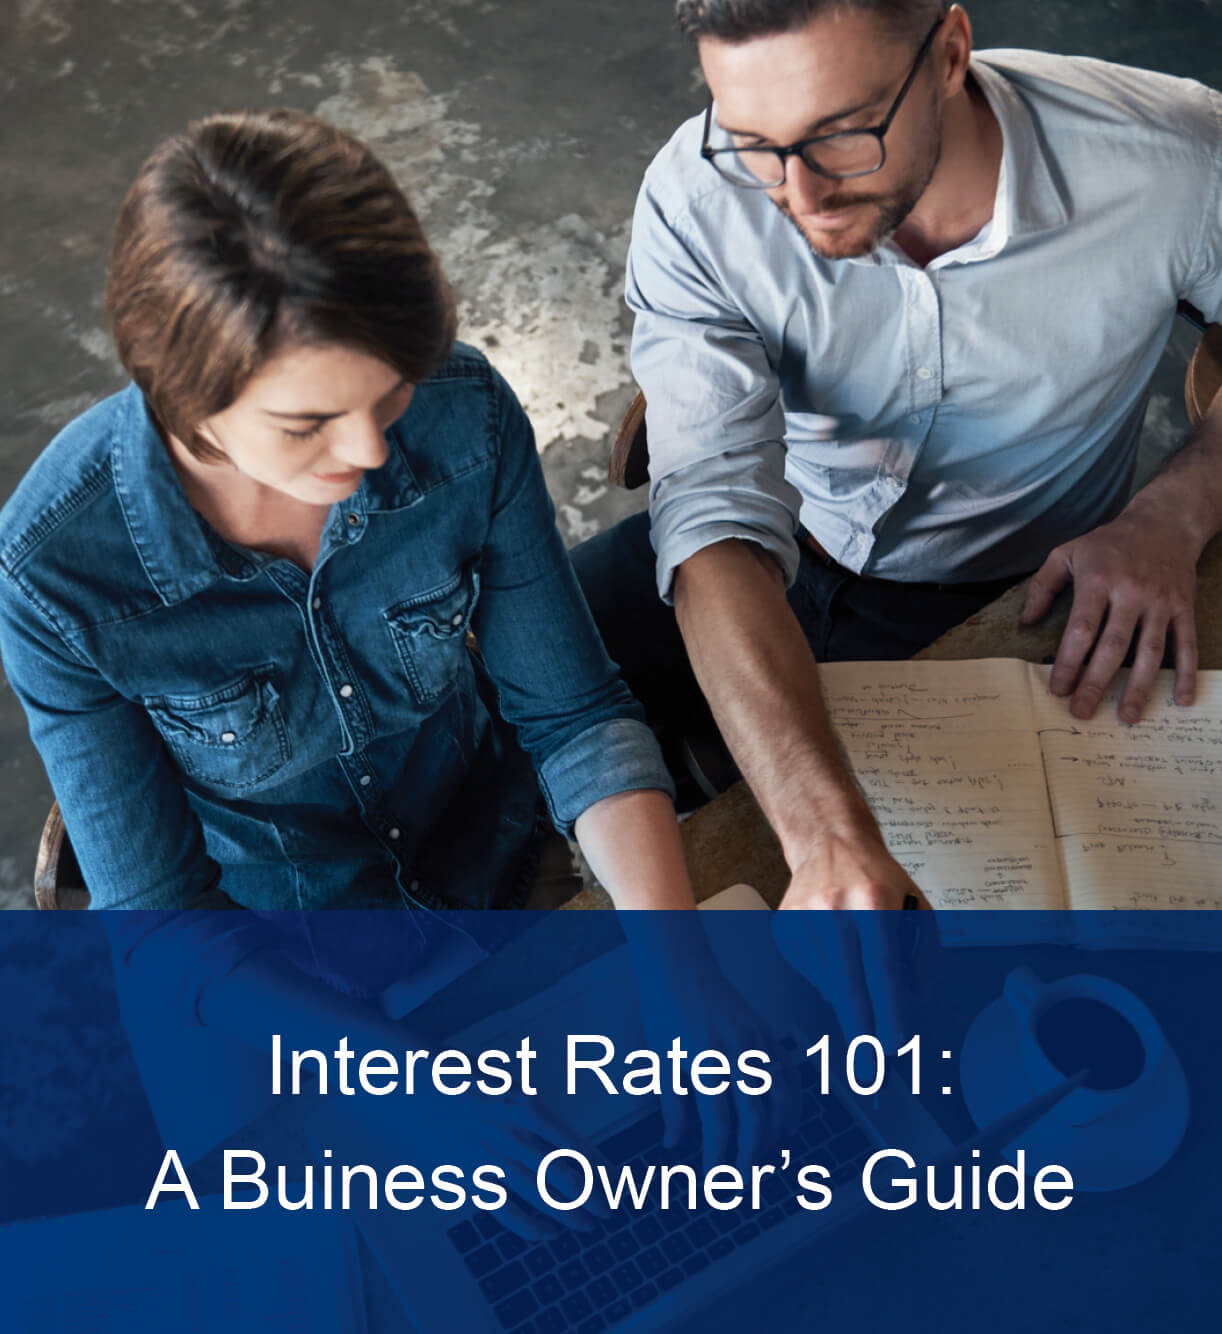 Interest Rates 101: A Business Owner's Guide